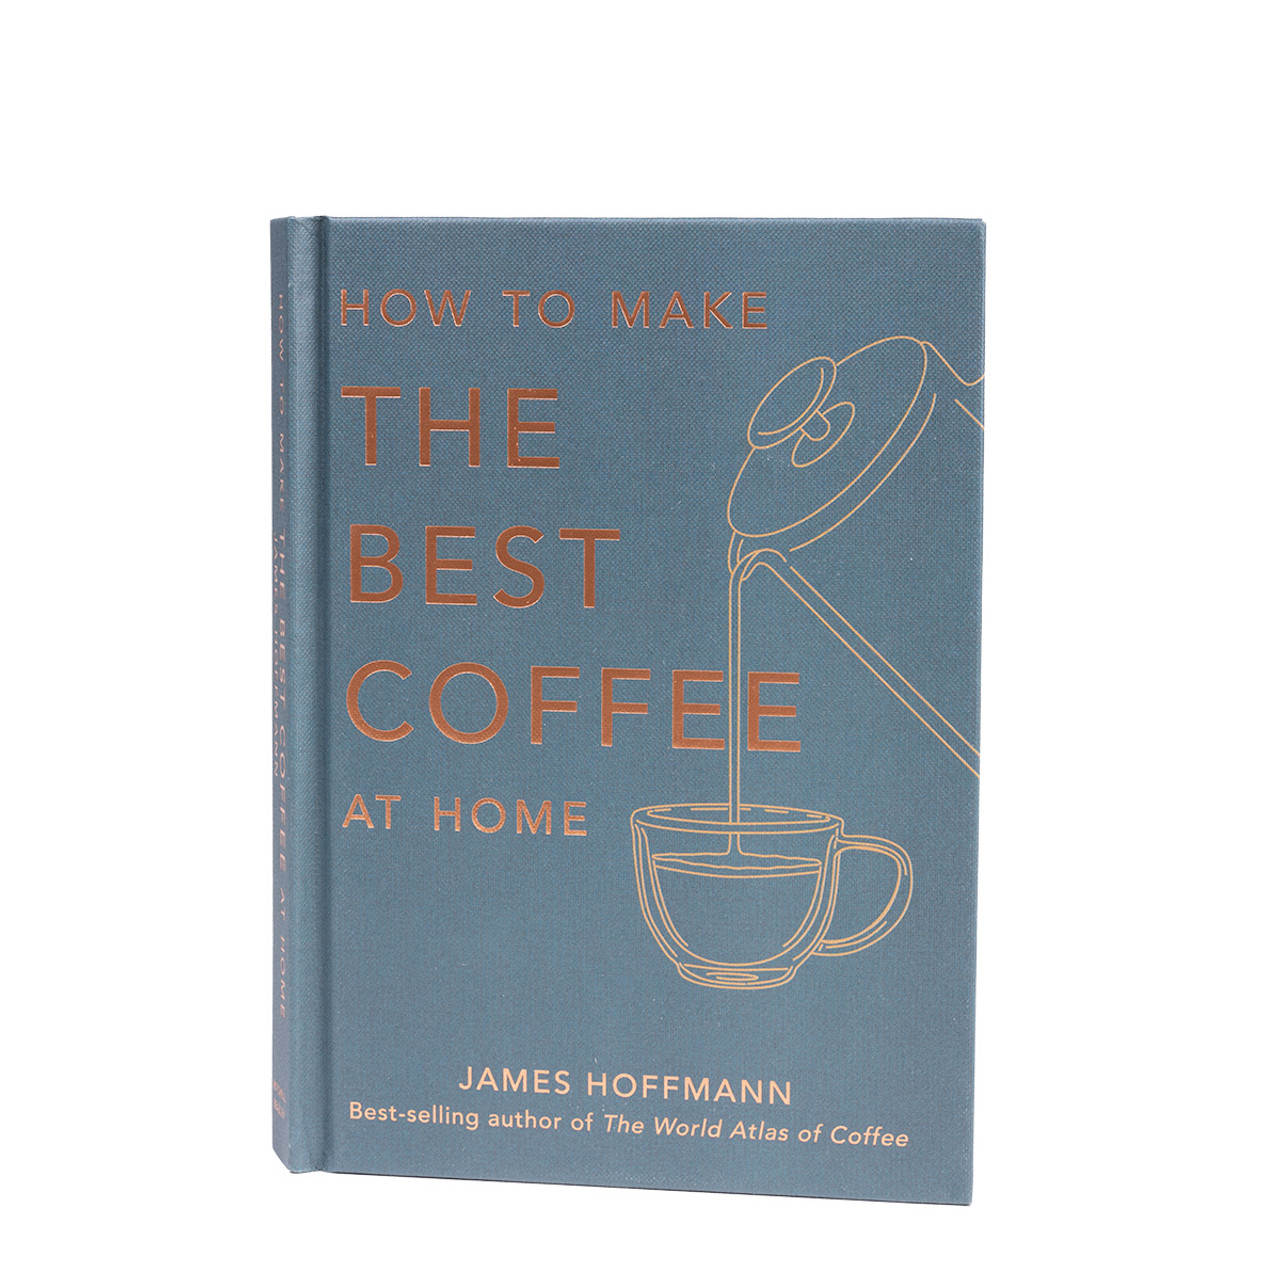 How to Make Coffee at Home